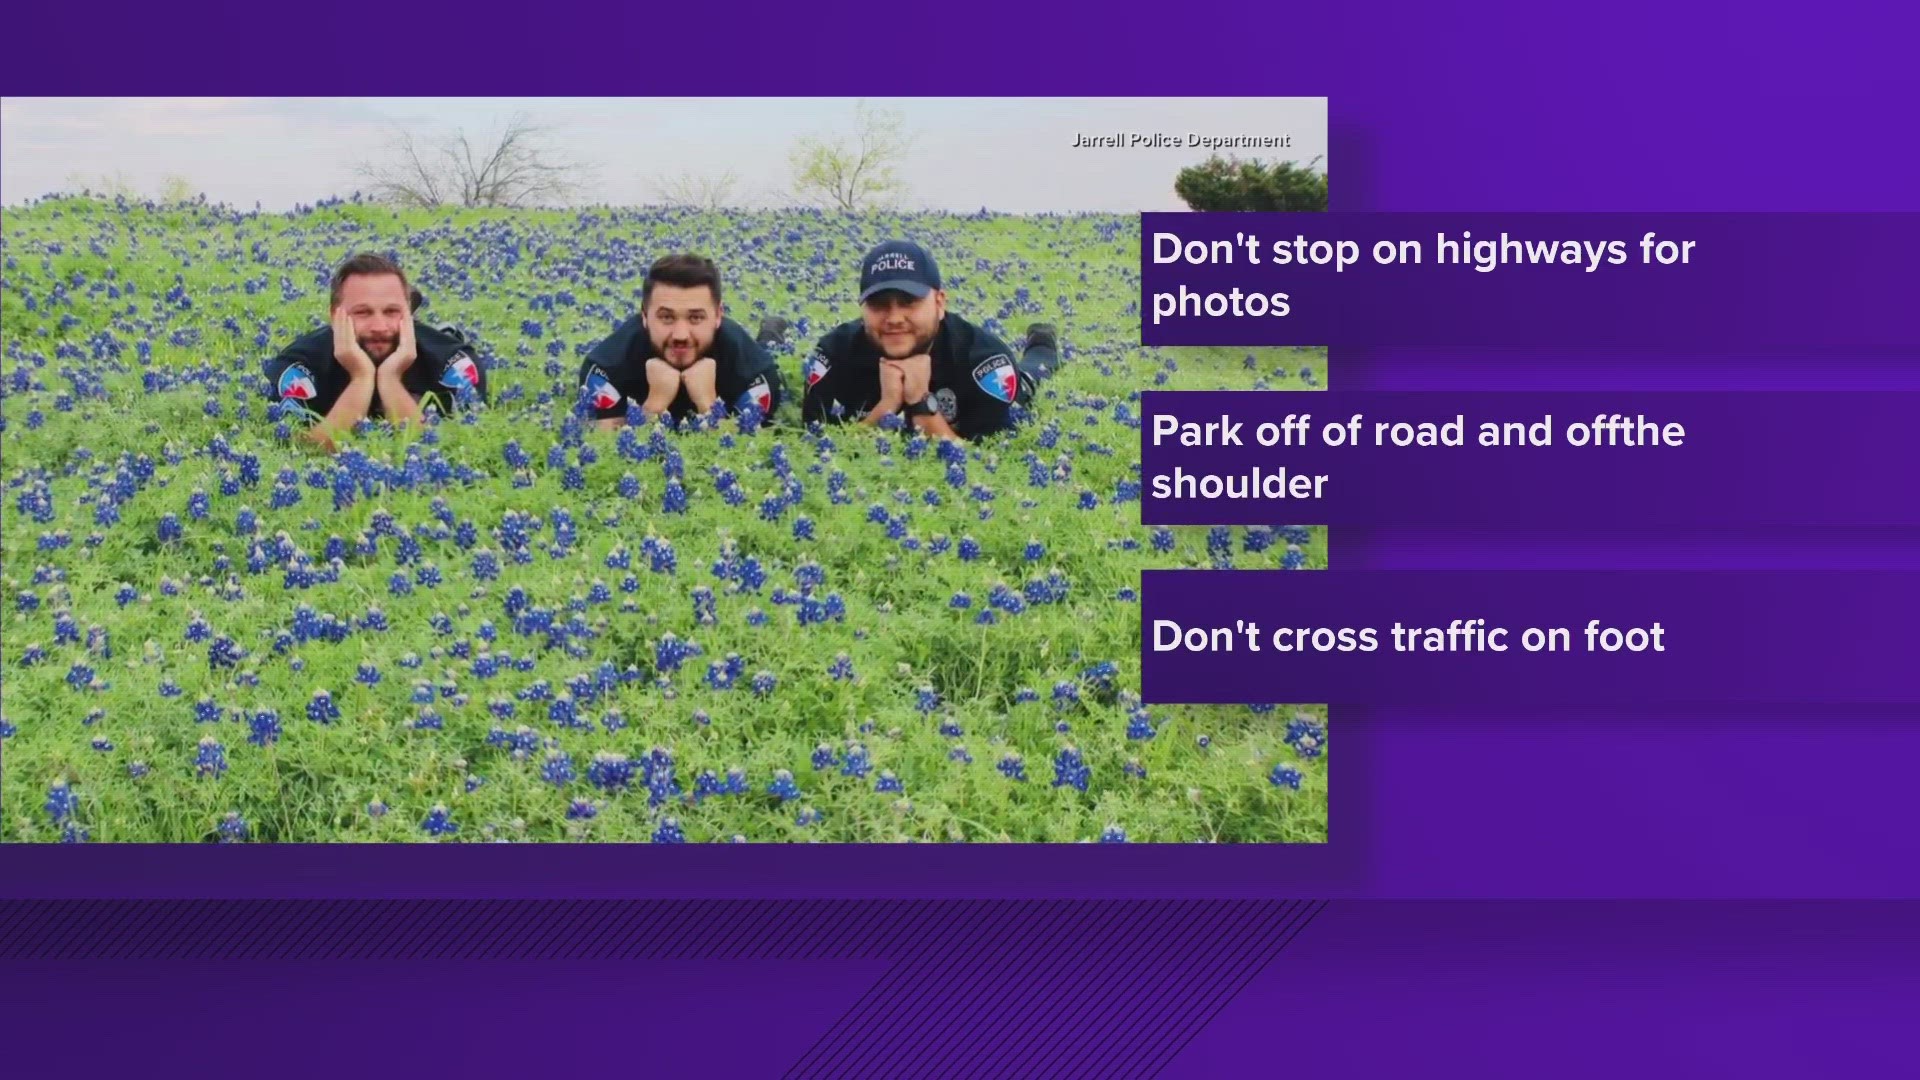 The Department posted pictures of officers posing amongst the bluebonnets while giving advice on how to stay safe.